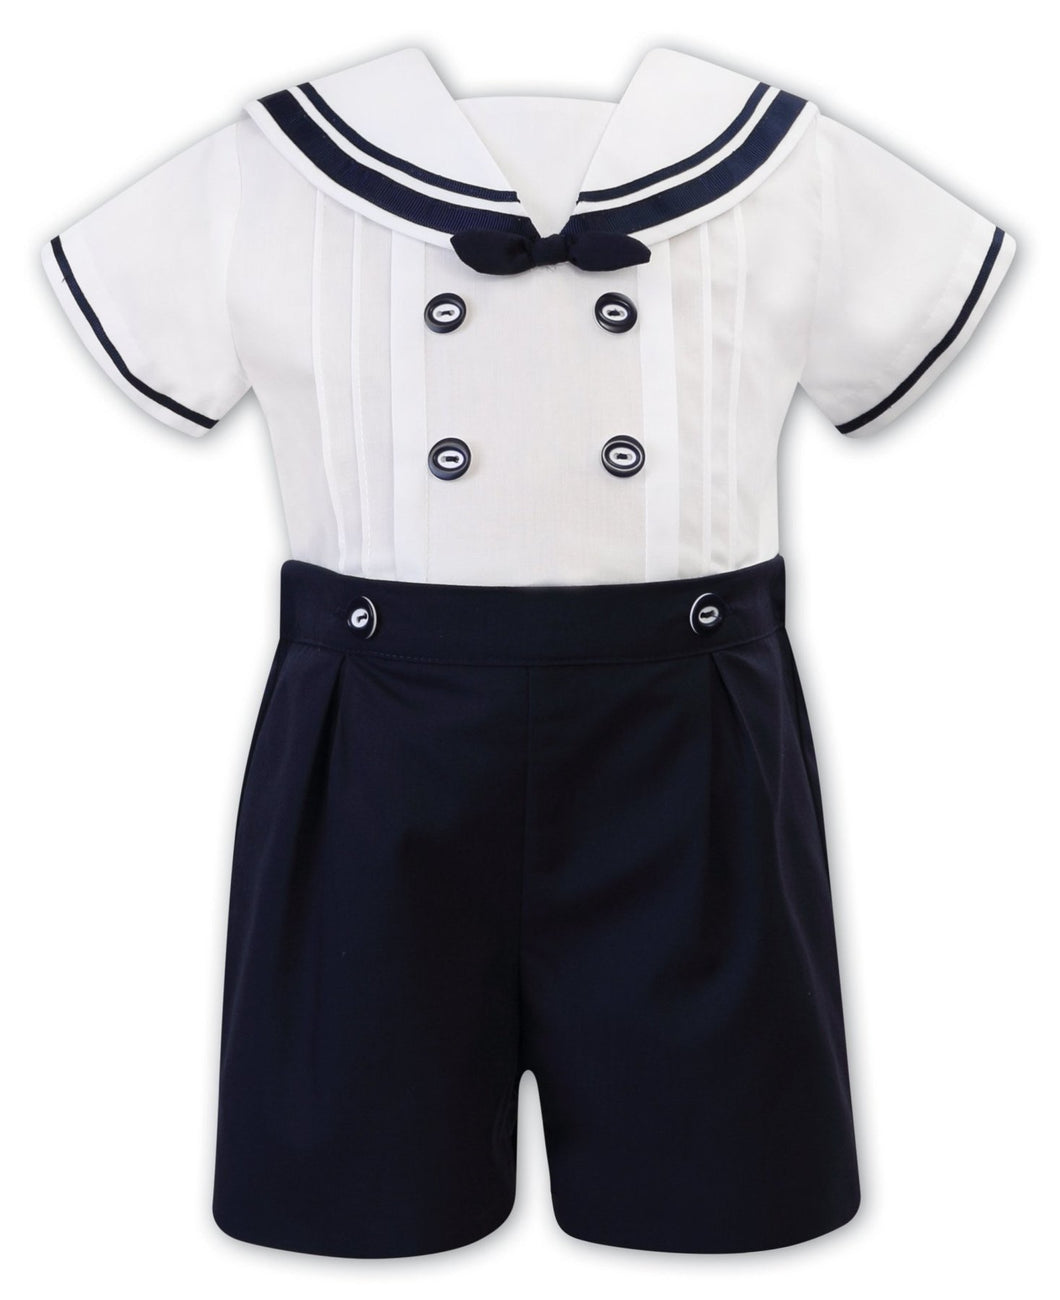 Boys 2 Piece Short Sleeved Set Sailor Style, Collar with Bow and Ribbon Trim, Shorts with Pleated Front and Button Fastening to Shirt